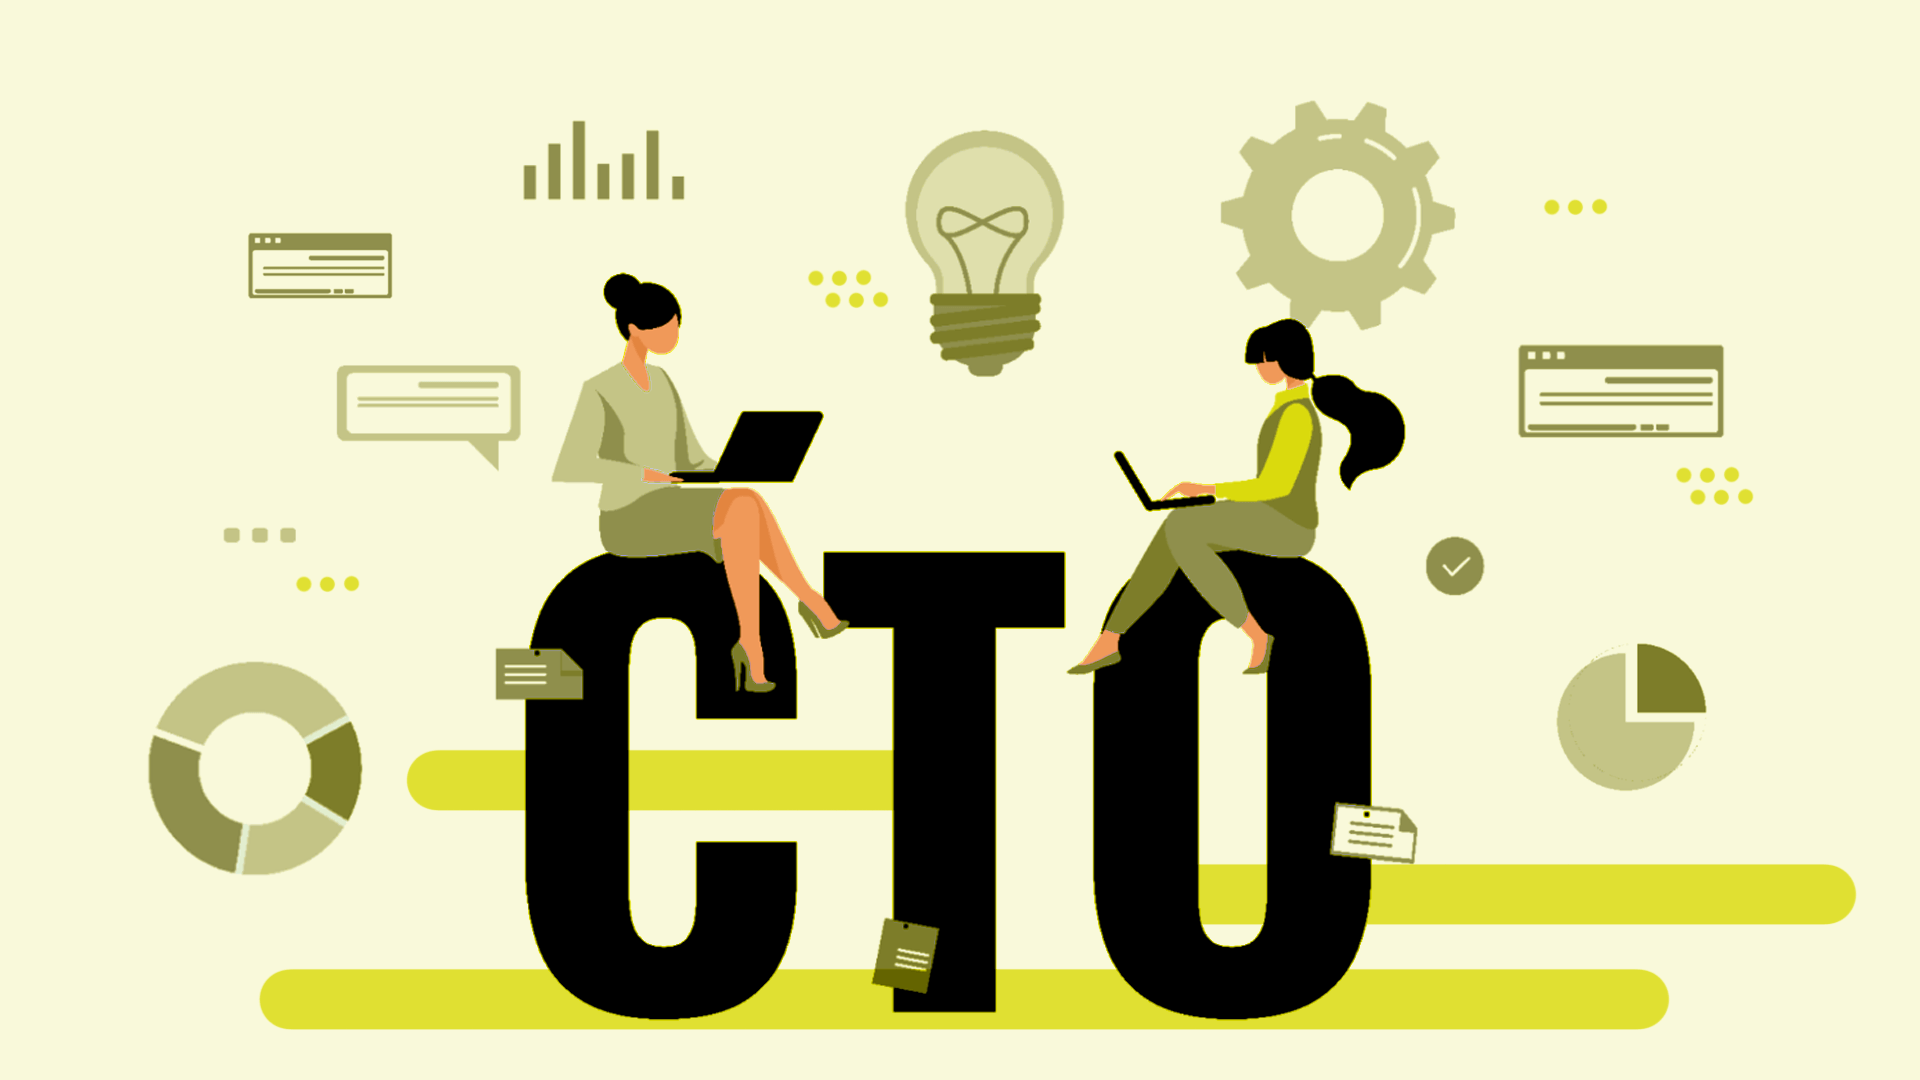 CTO as a Service: Ultimate Guide on Explaining the Service’s Top Practices, Tools, & Benefits 0